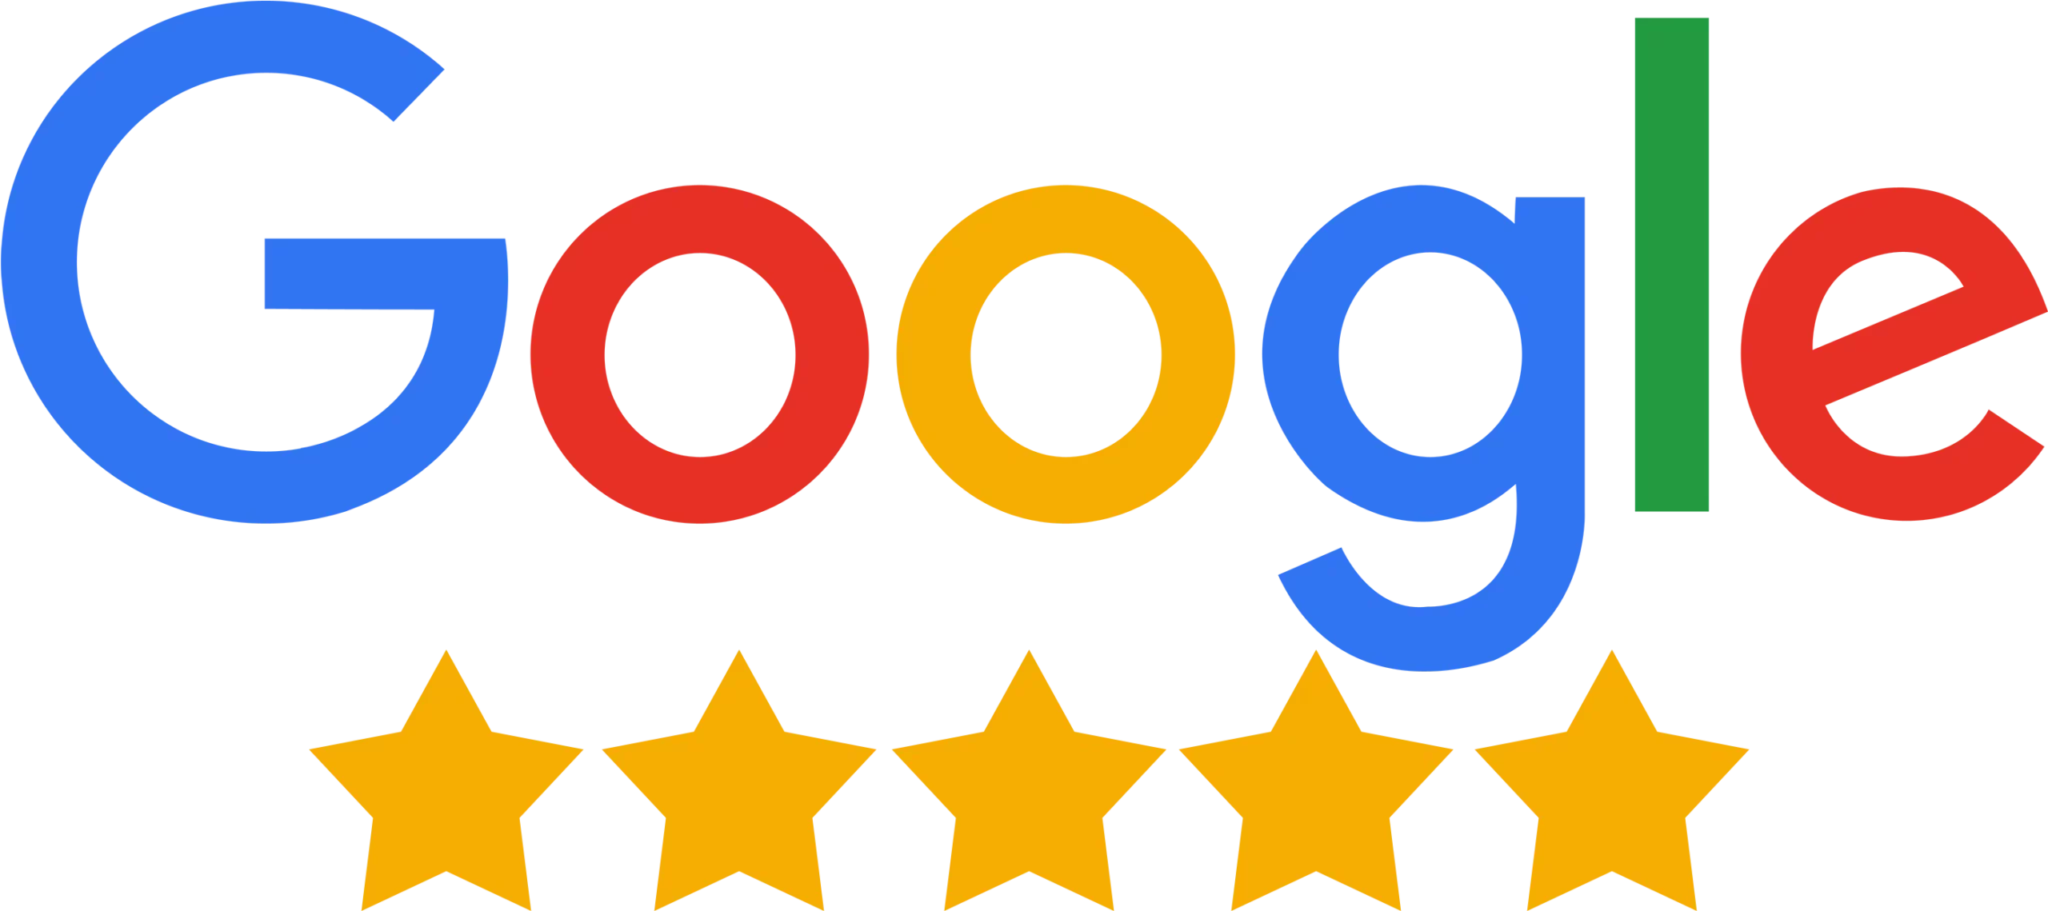 A Google Logo With Five Stars On It, Showcasing Web Design.